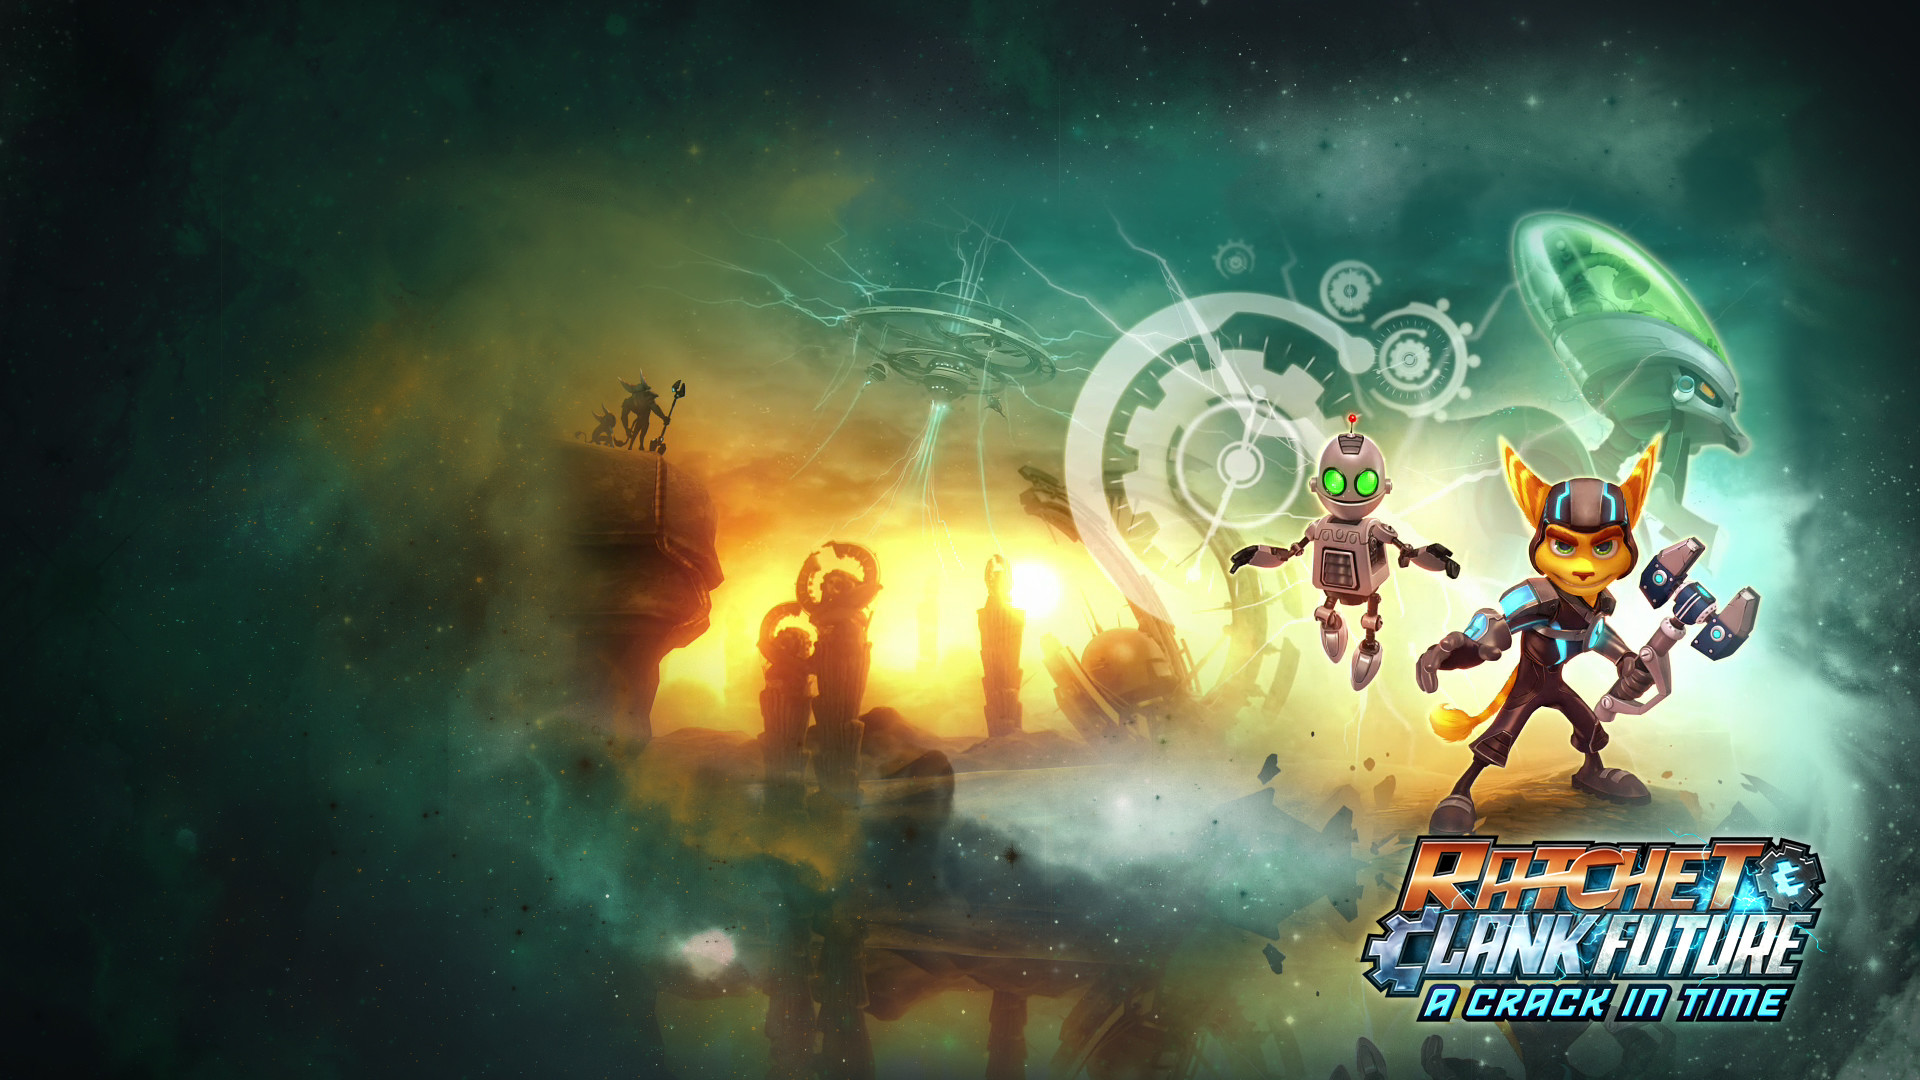 1920x1080 Ratchet & Clank Future: A Crack in Time HD Wallpaper | Hintergrund |   | ID:679350 - Wallpaper Abyss